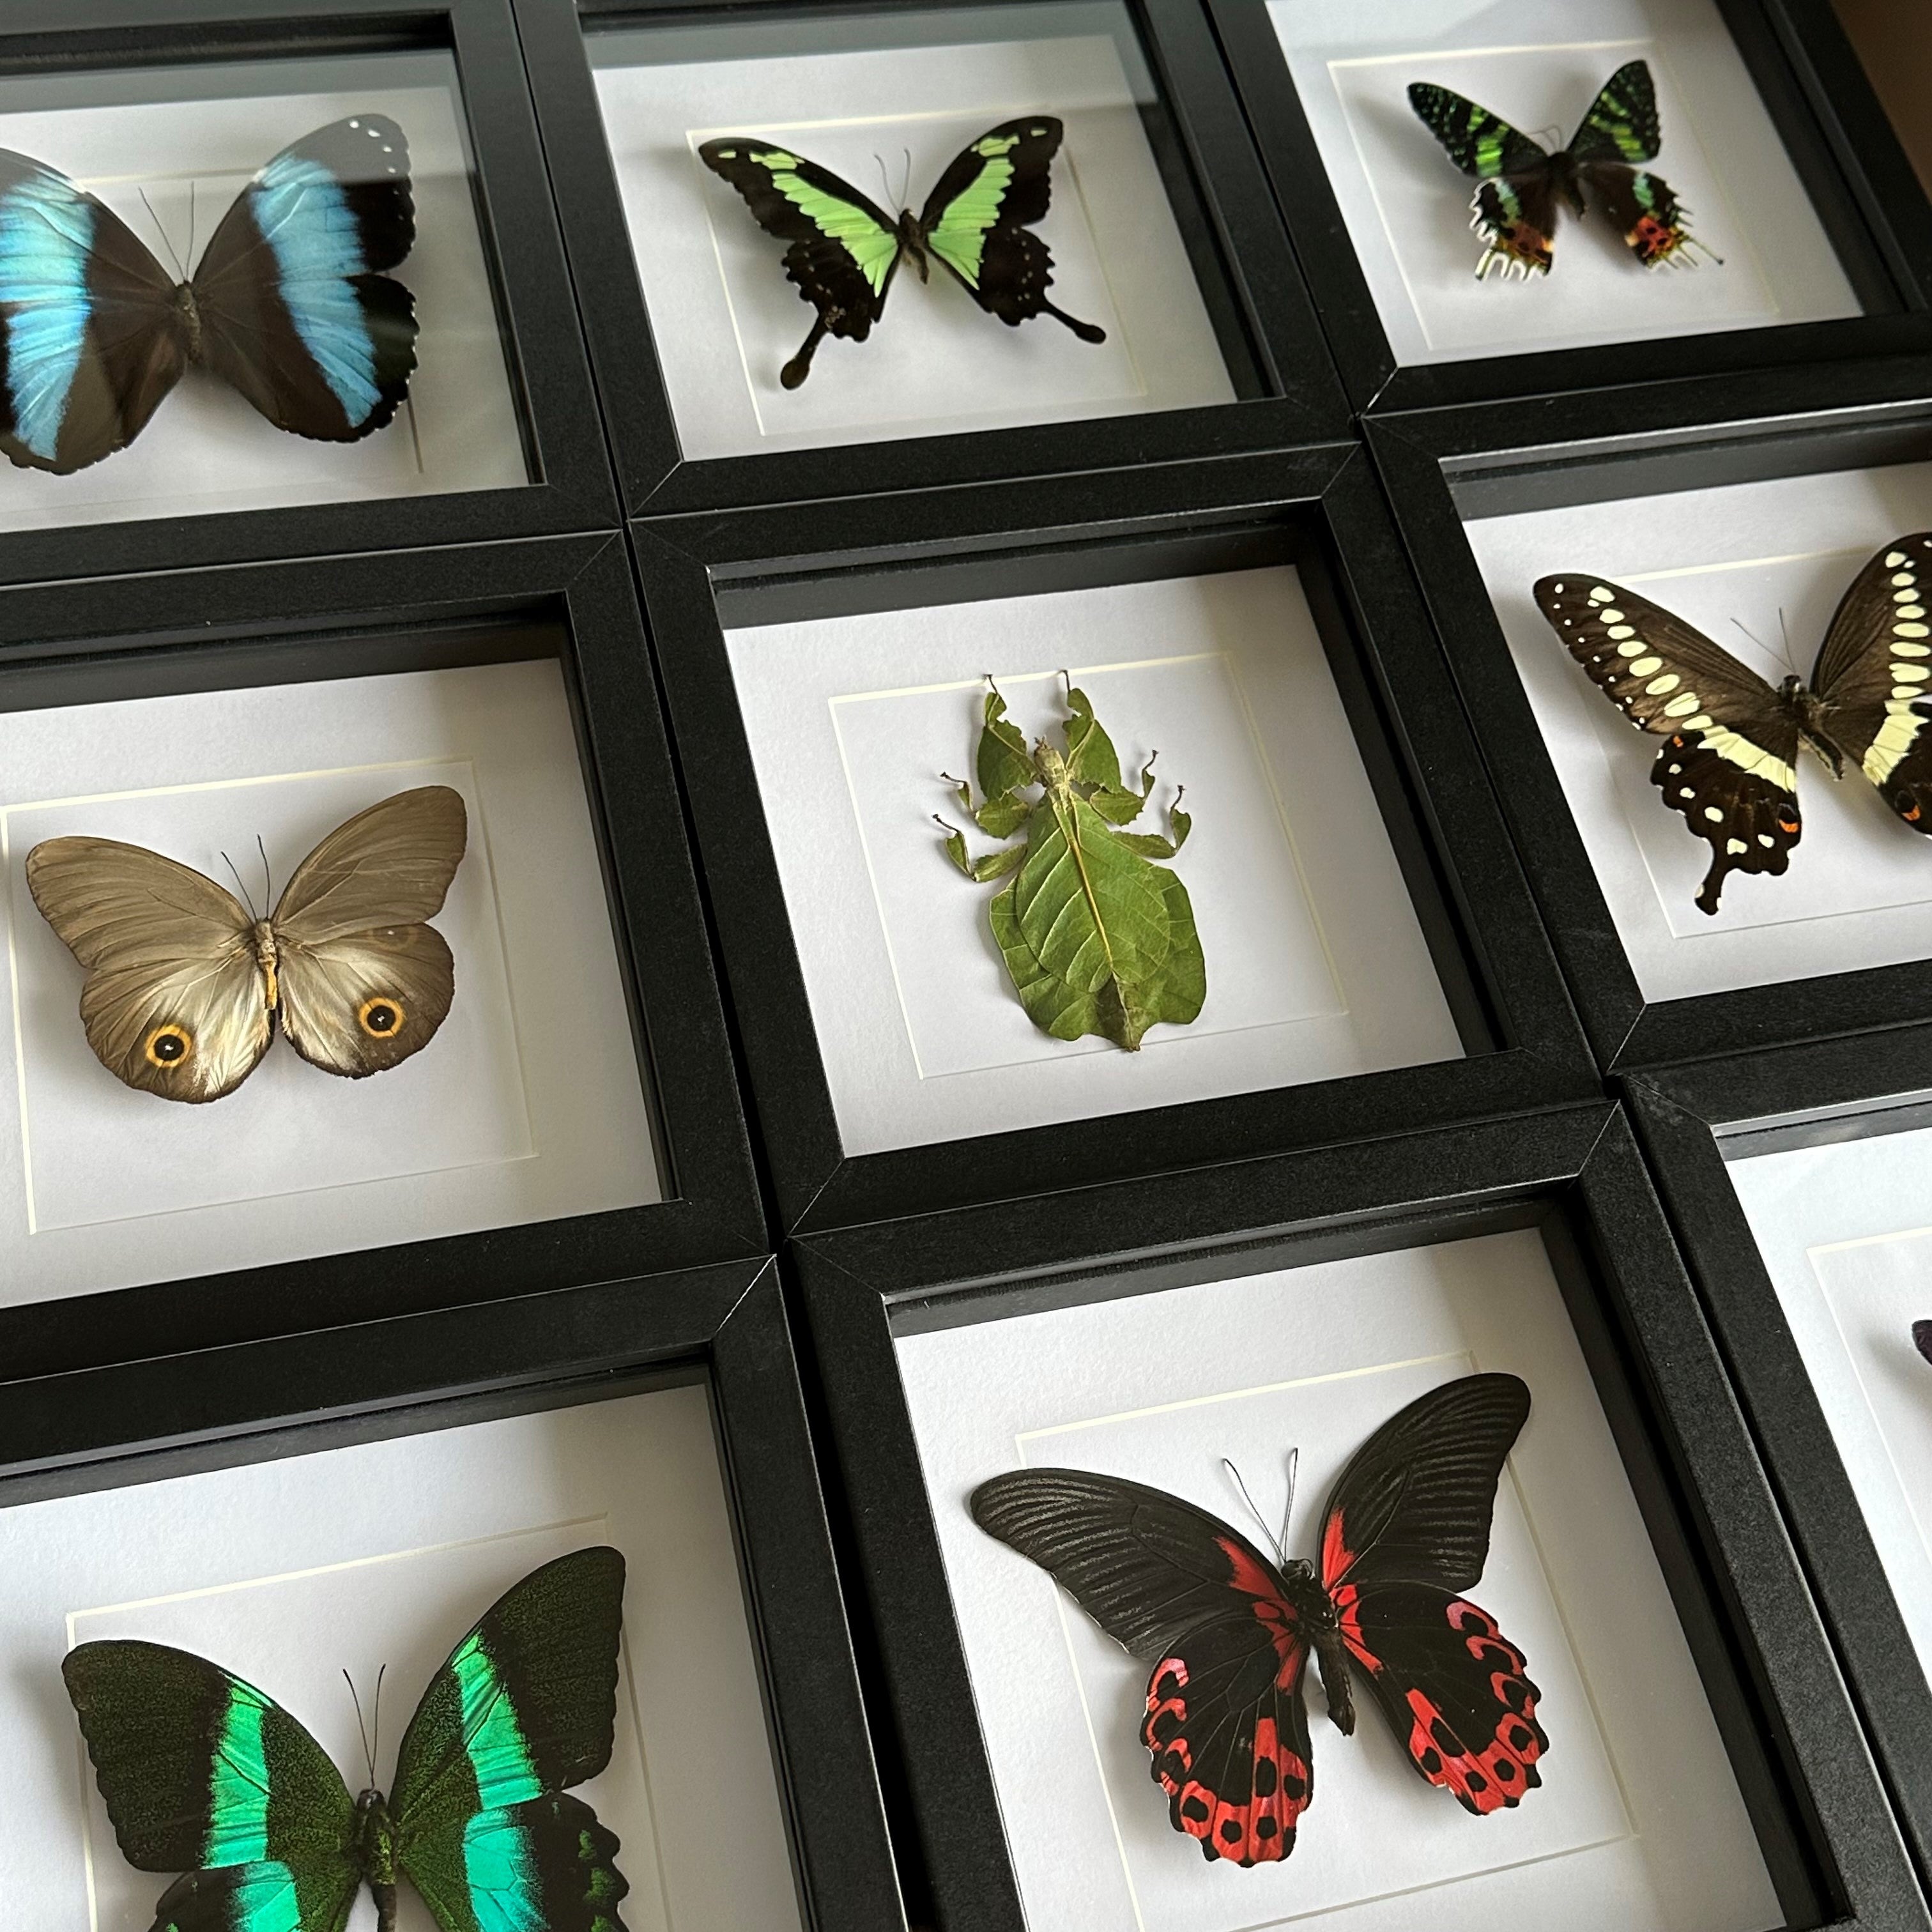 Framed butterflies and insects